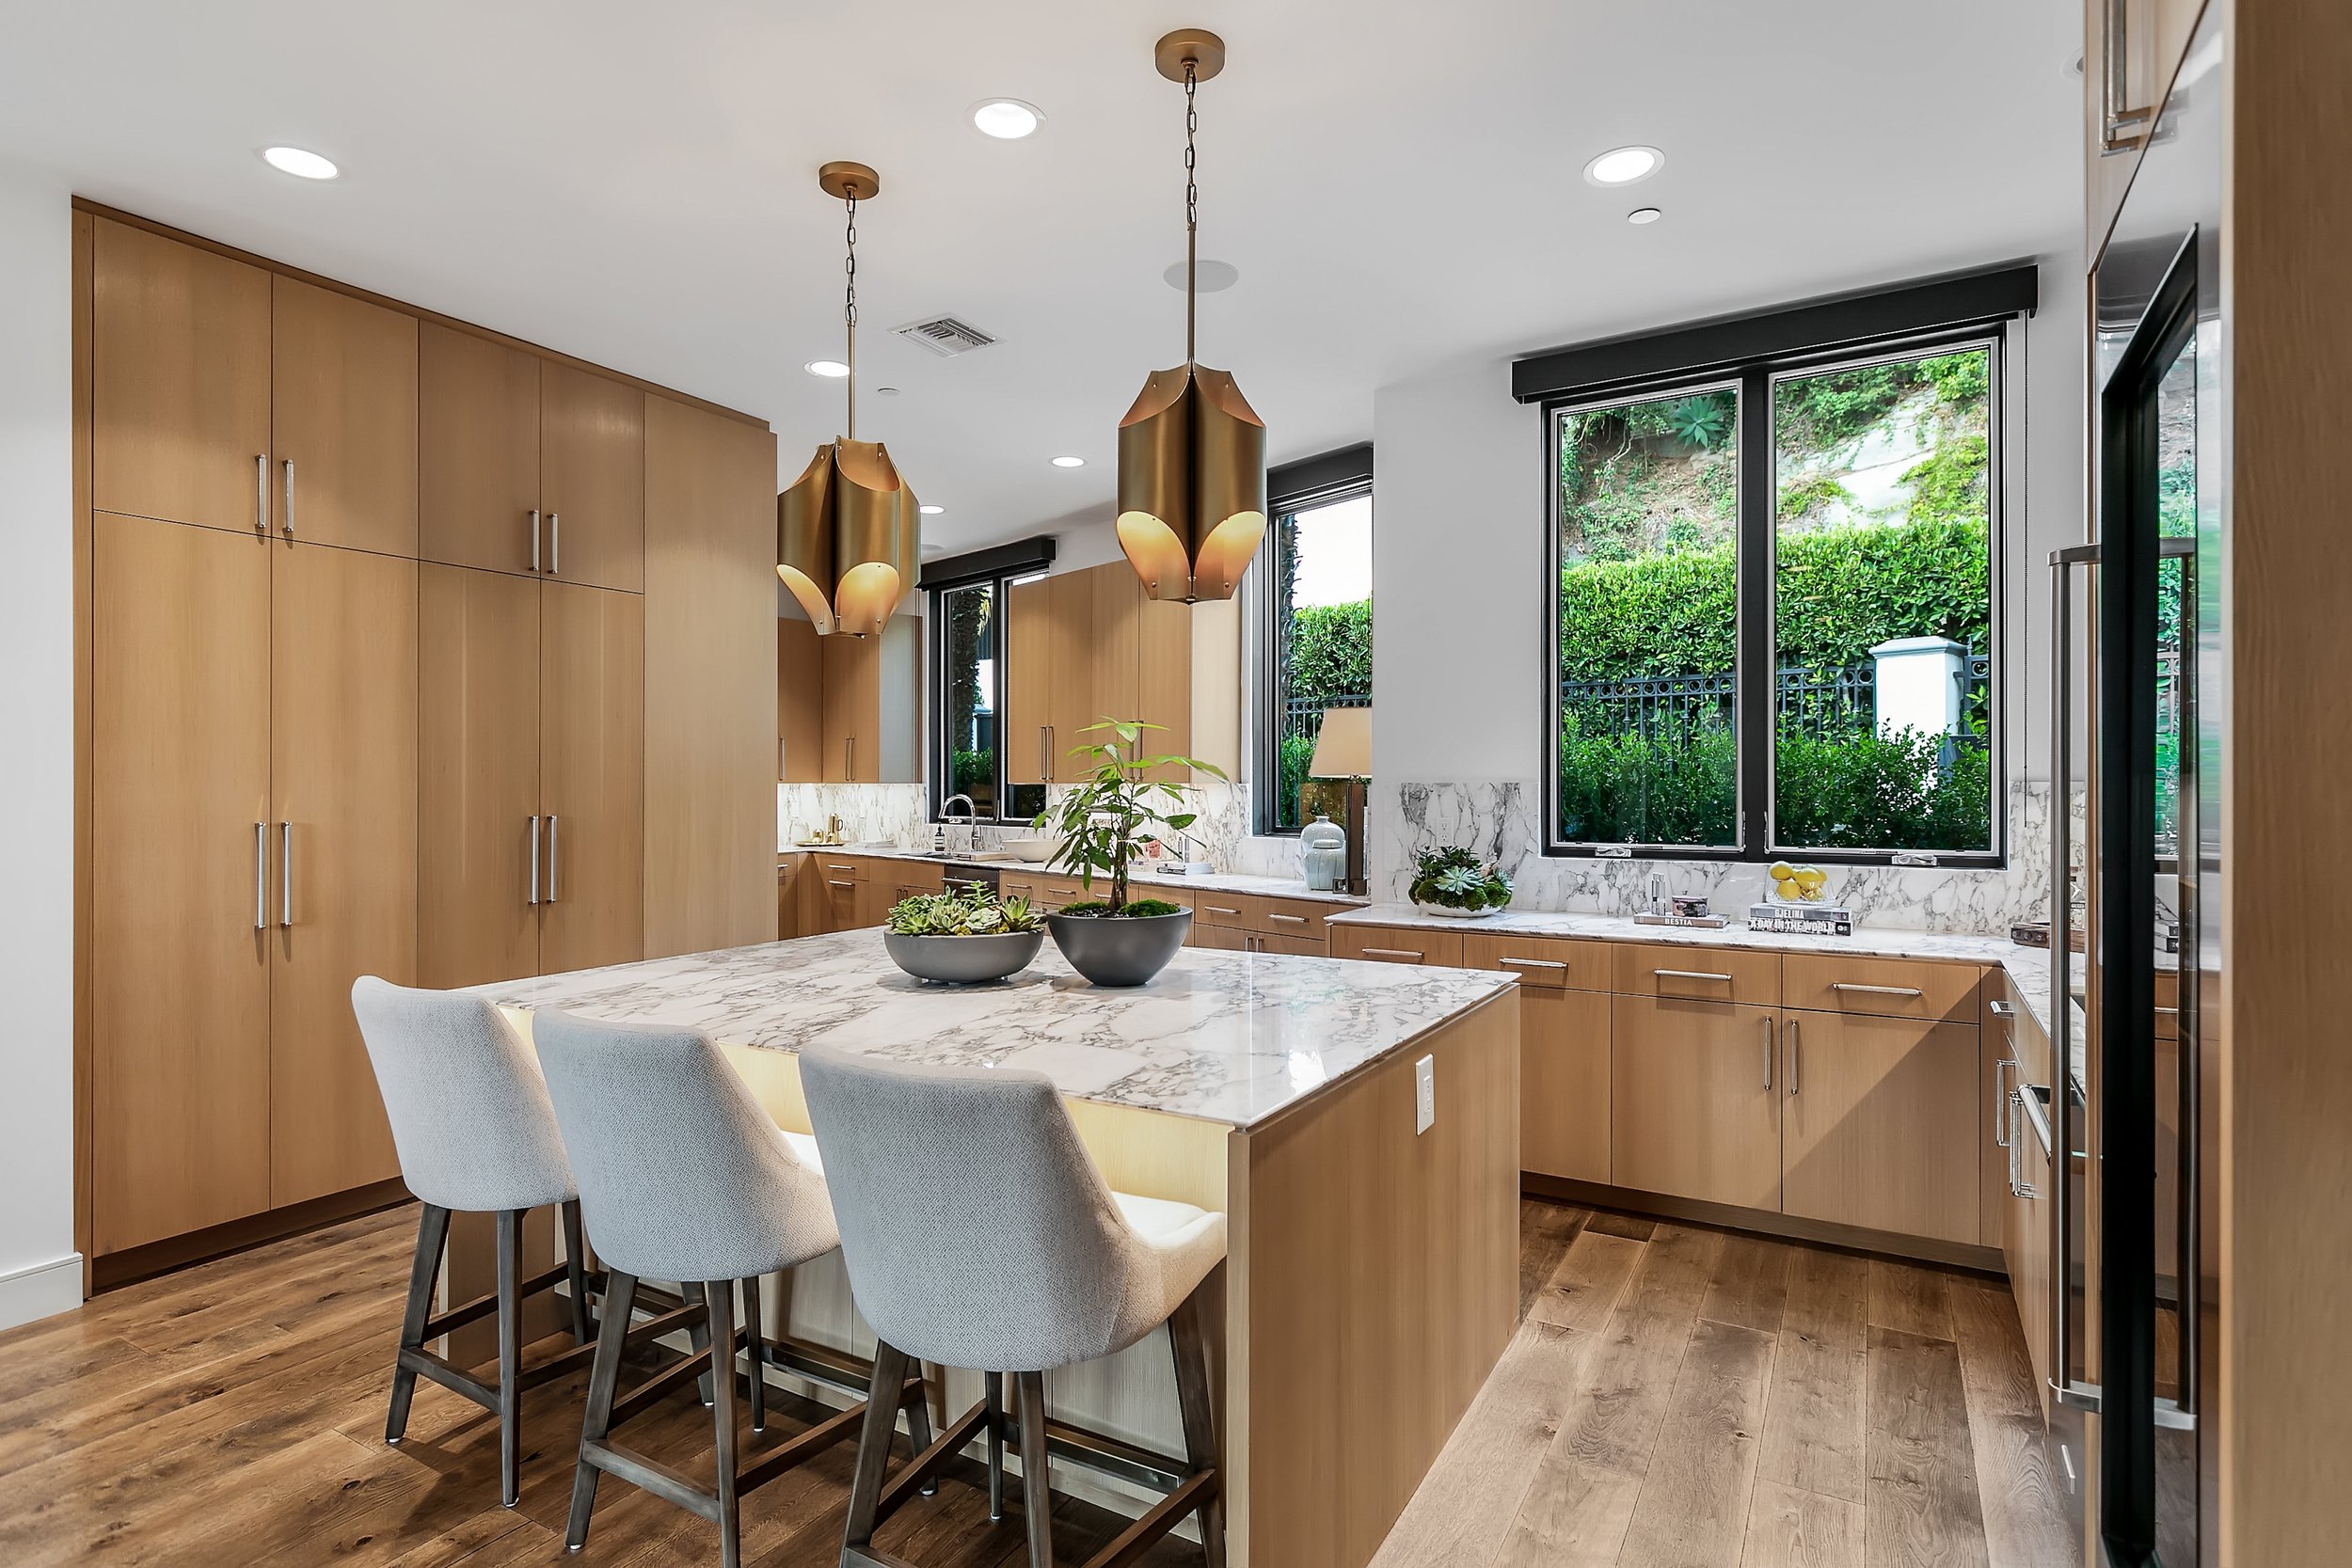  The oversized chef's kitchen exemplifies modern perfection with custom stained rift white oak cabinetry, dramatic polished Arabescato marble countertops and top-of-the-line Subzero/Wolf/KitchenAid/Miele appliances. 